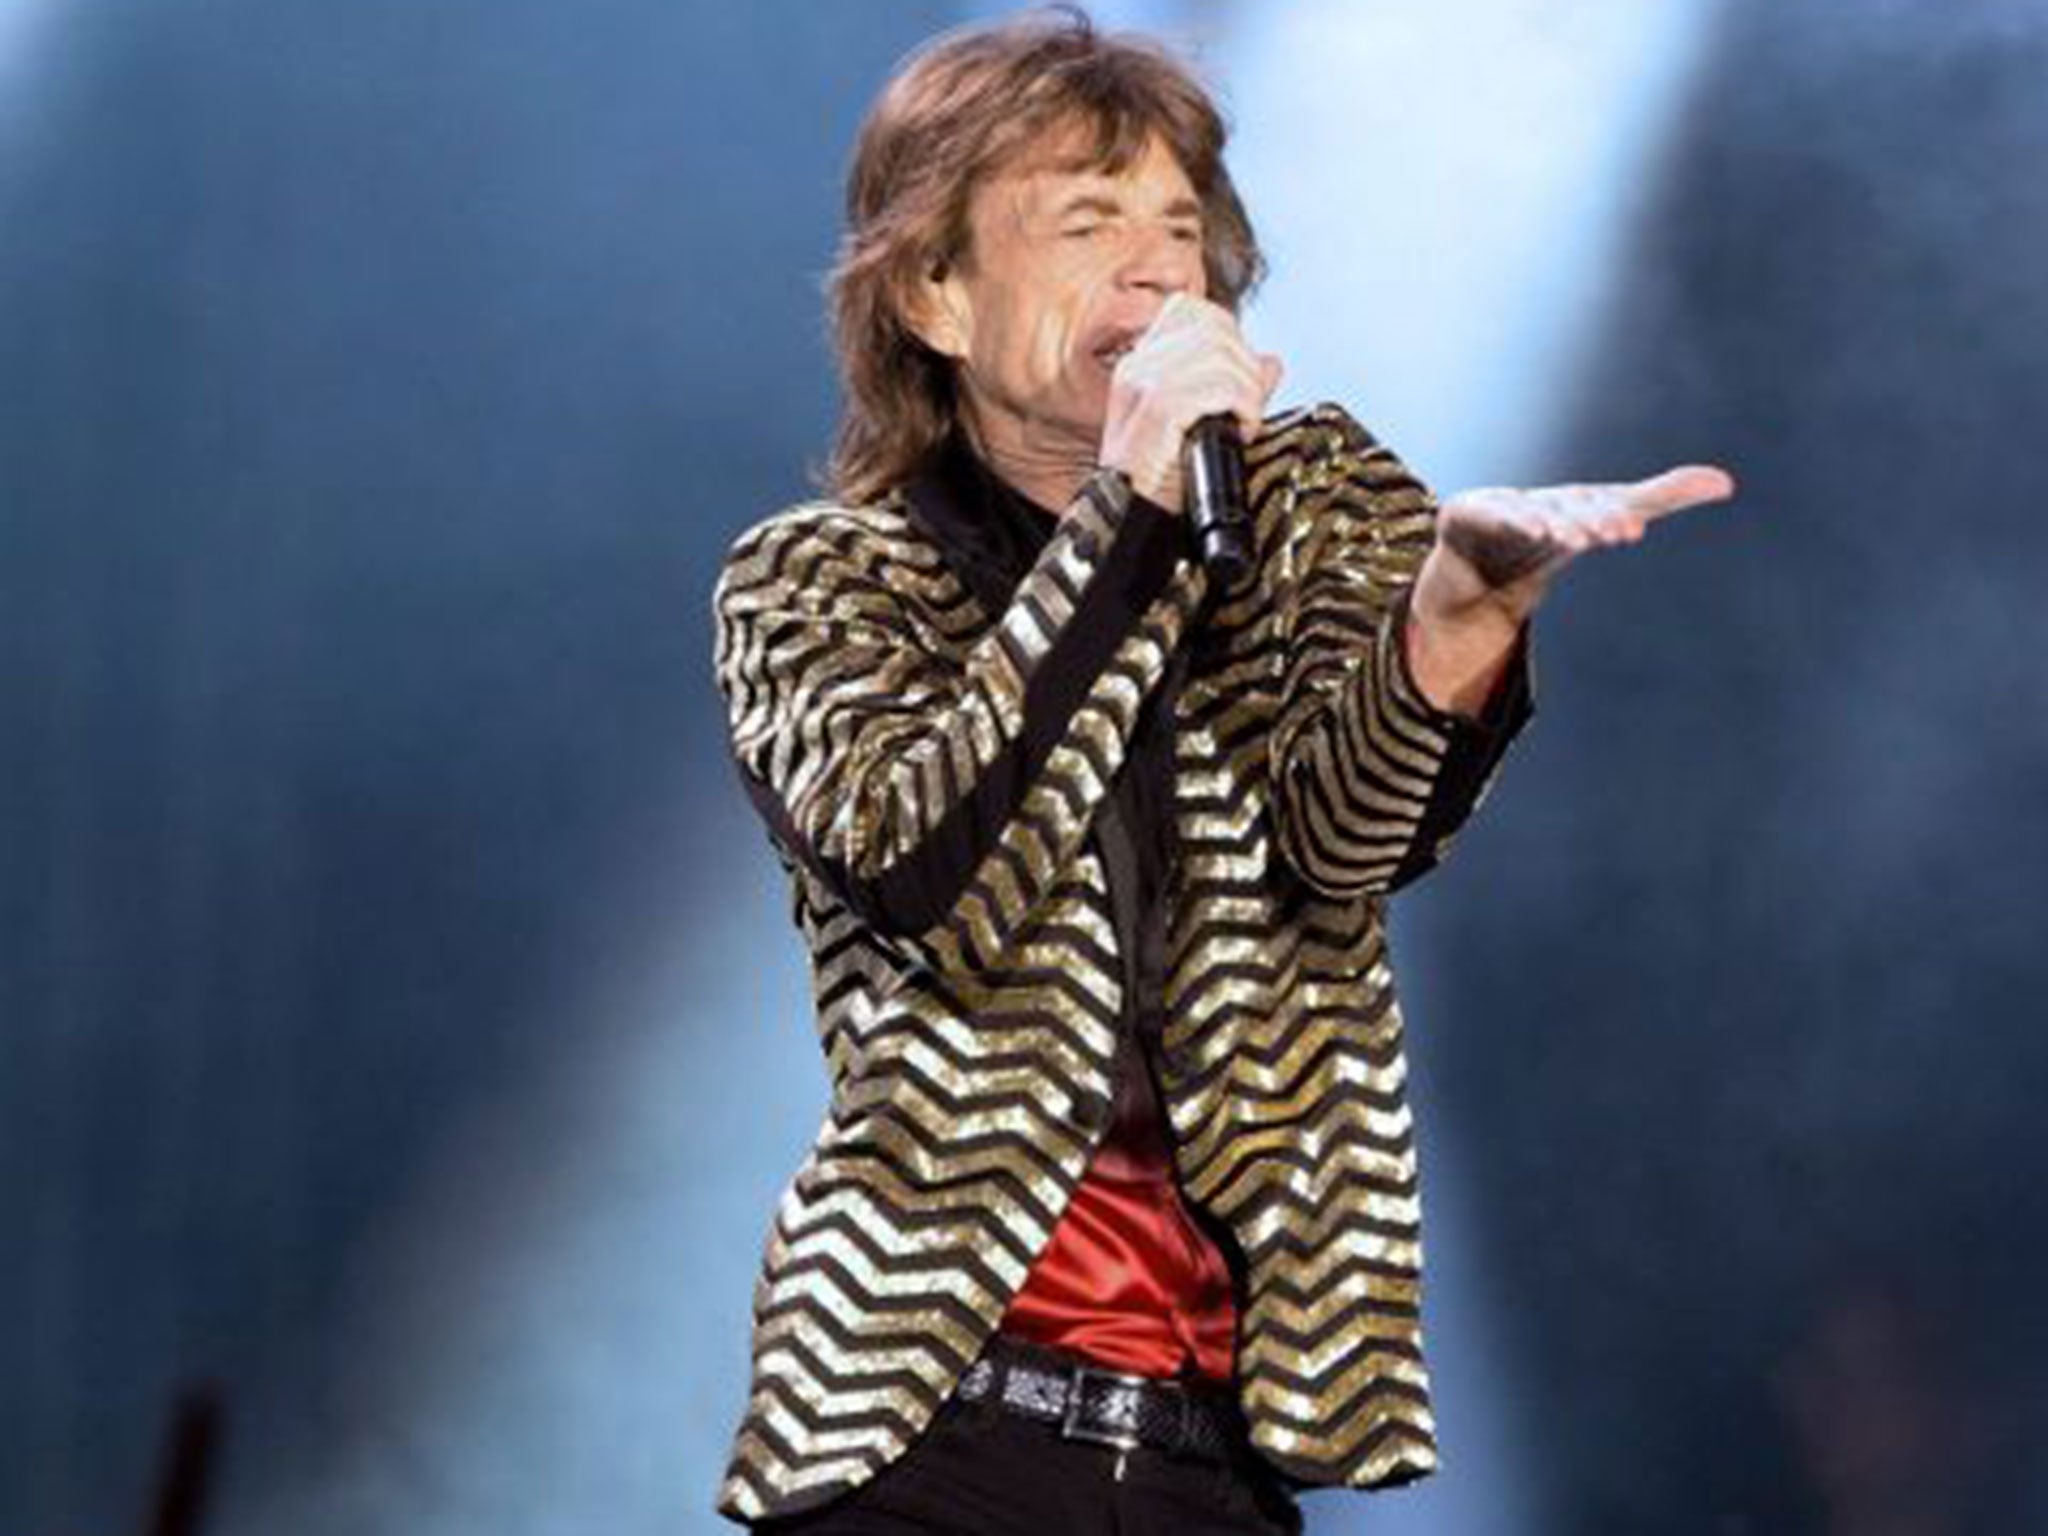 Mick Jagger received his knighthood in 2003